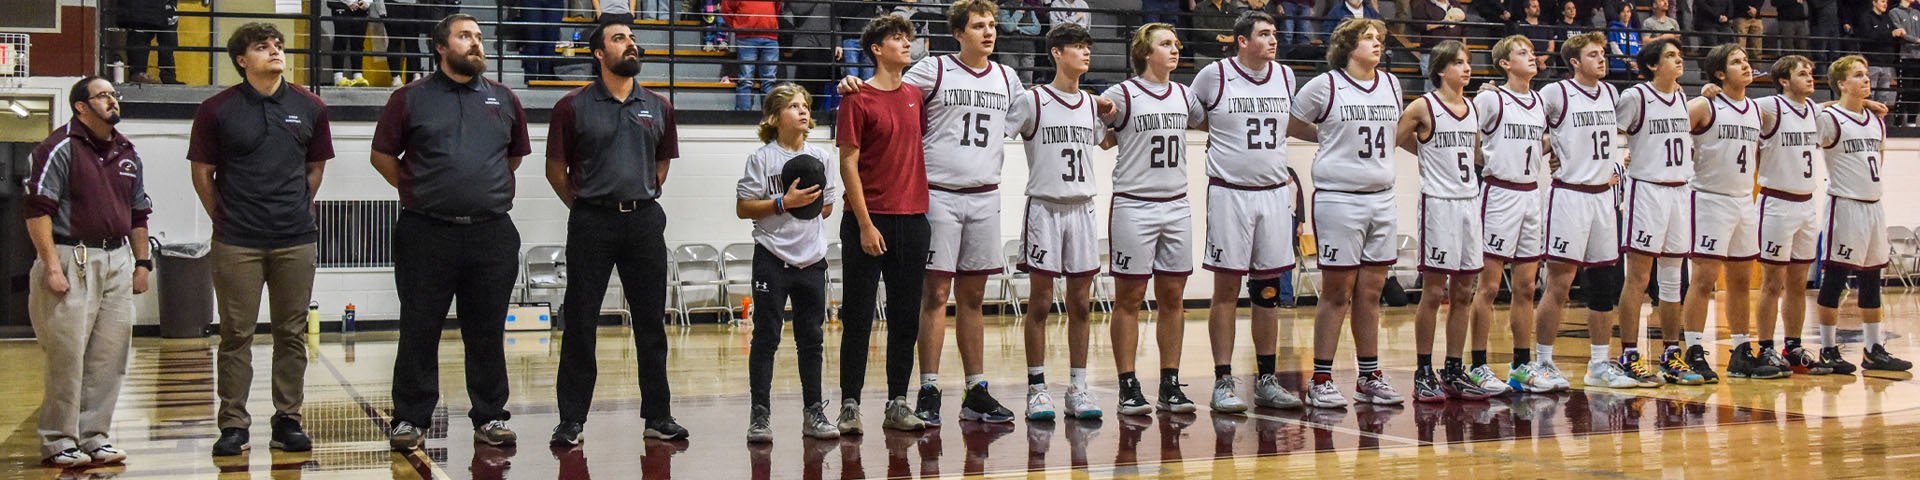 The LI Boys Basketball team lined up on the court for the National Anthem at a home game. 